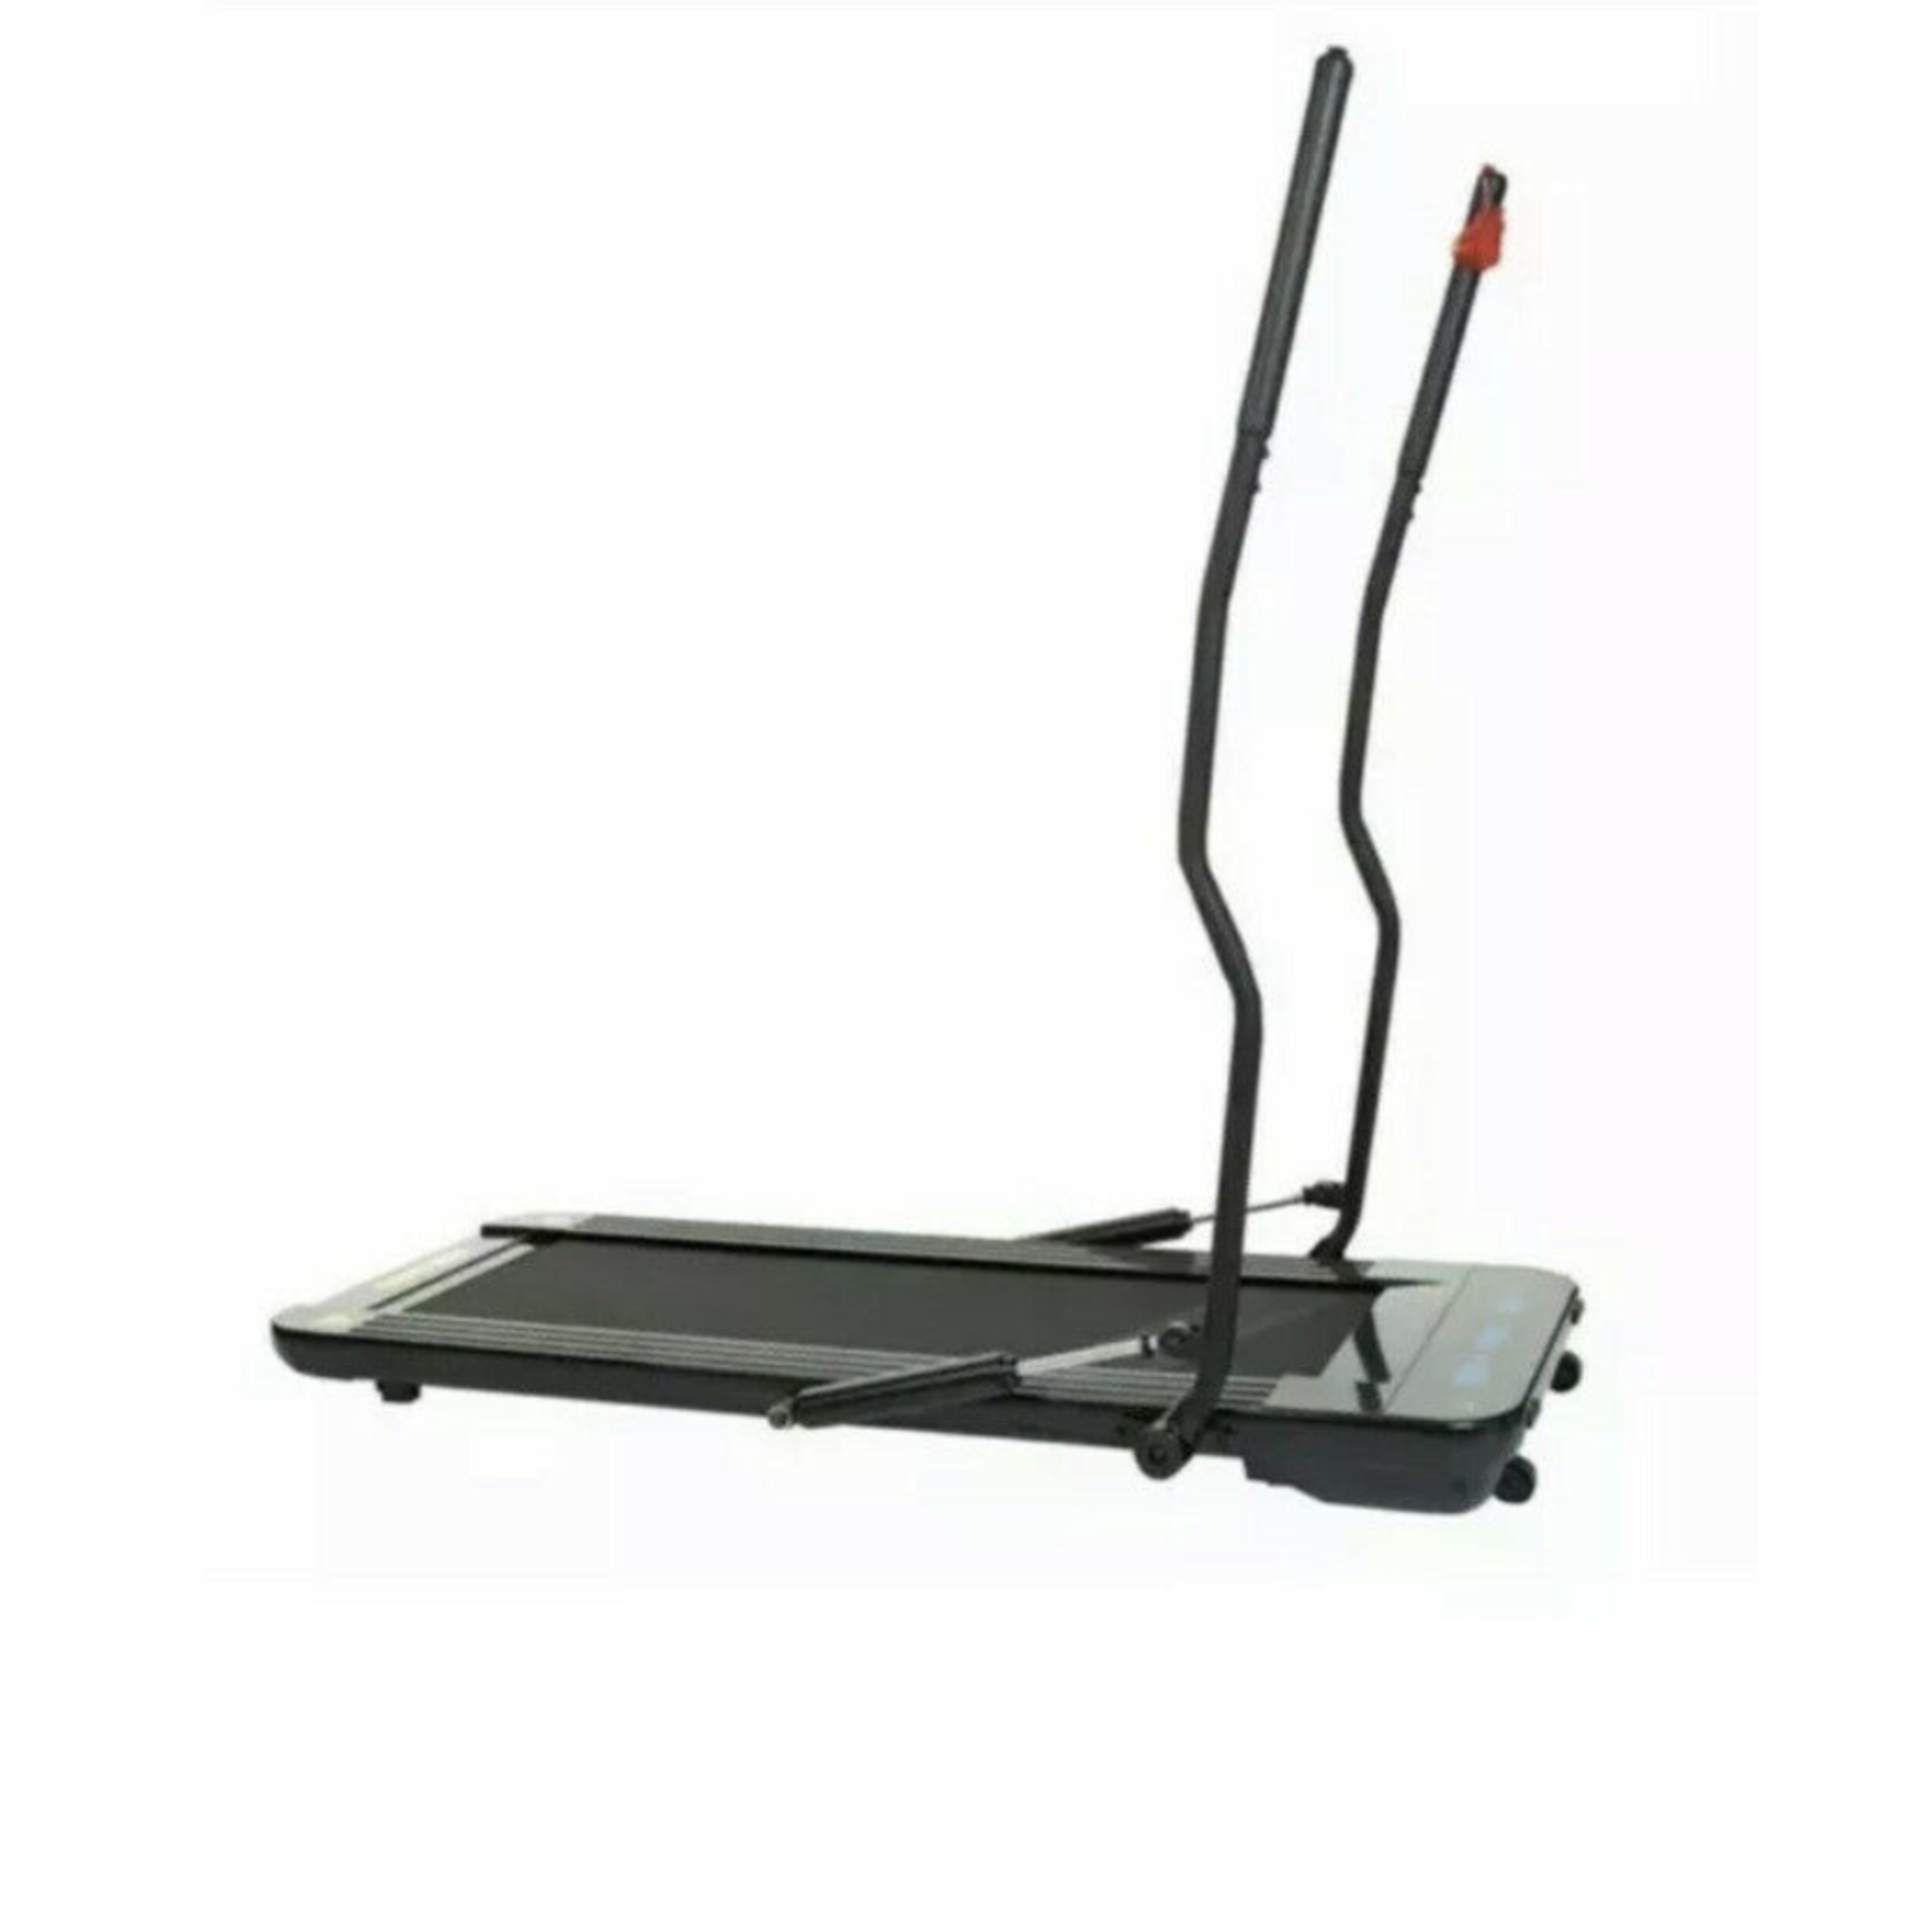 BRAND NEW LINEAR STRIDER FOLDABLE WALKING TREADMILL WITH REMOTE. RRP £299. (S1-30P)